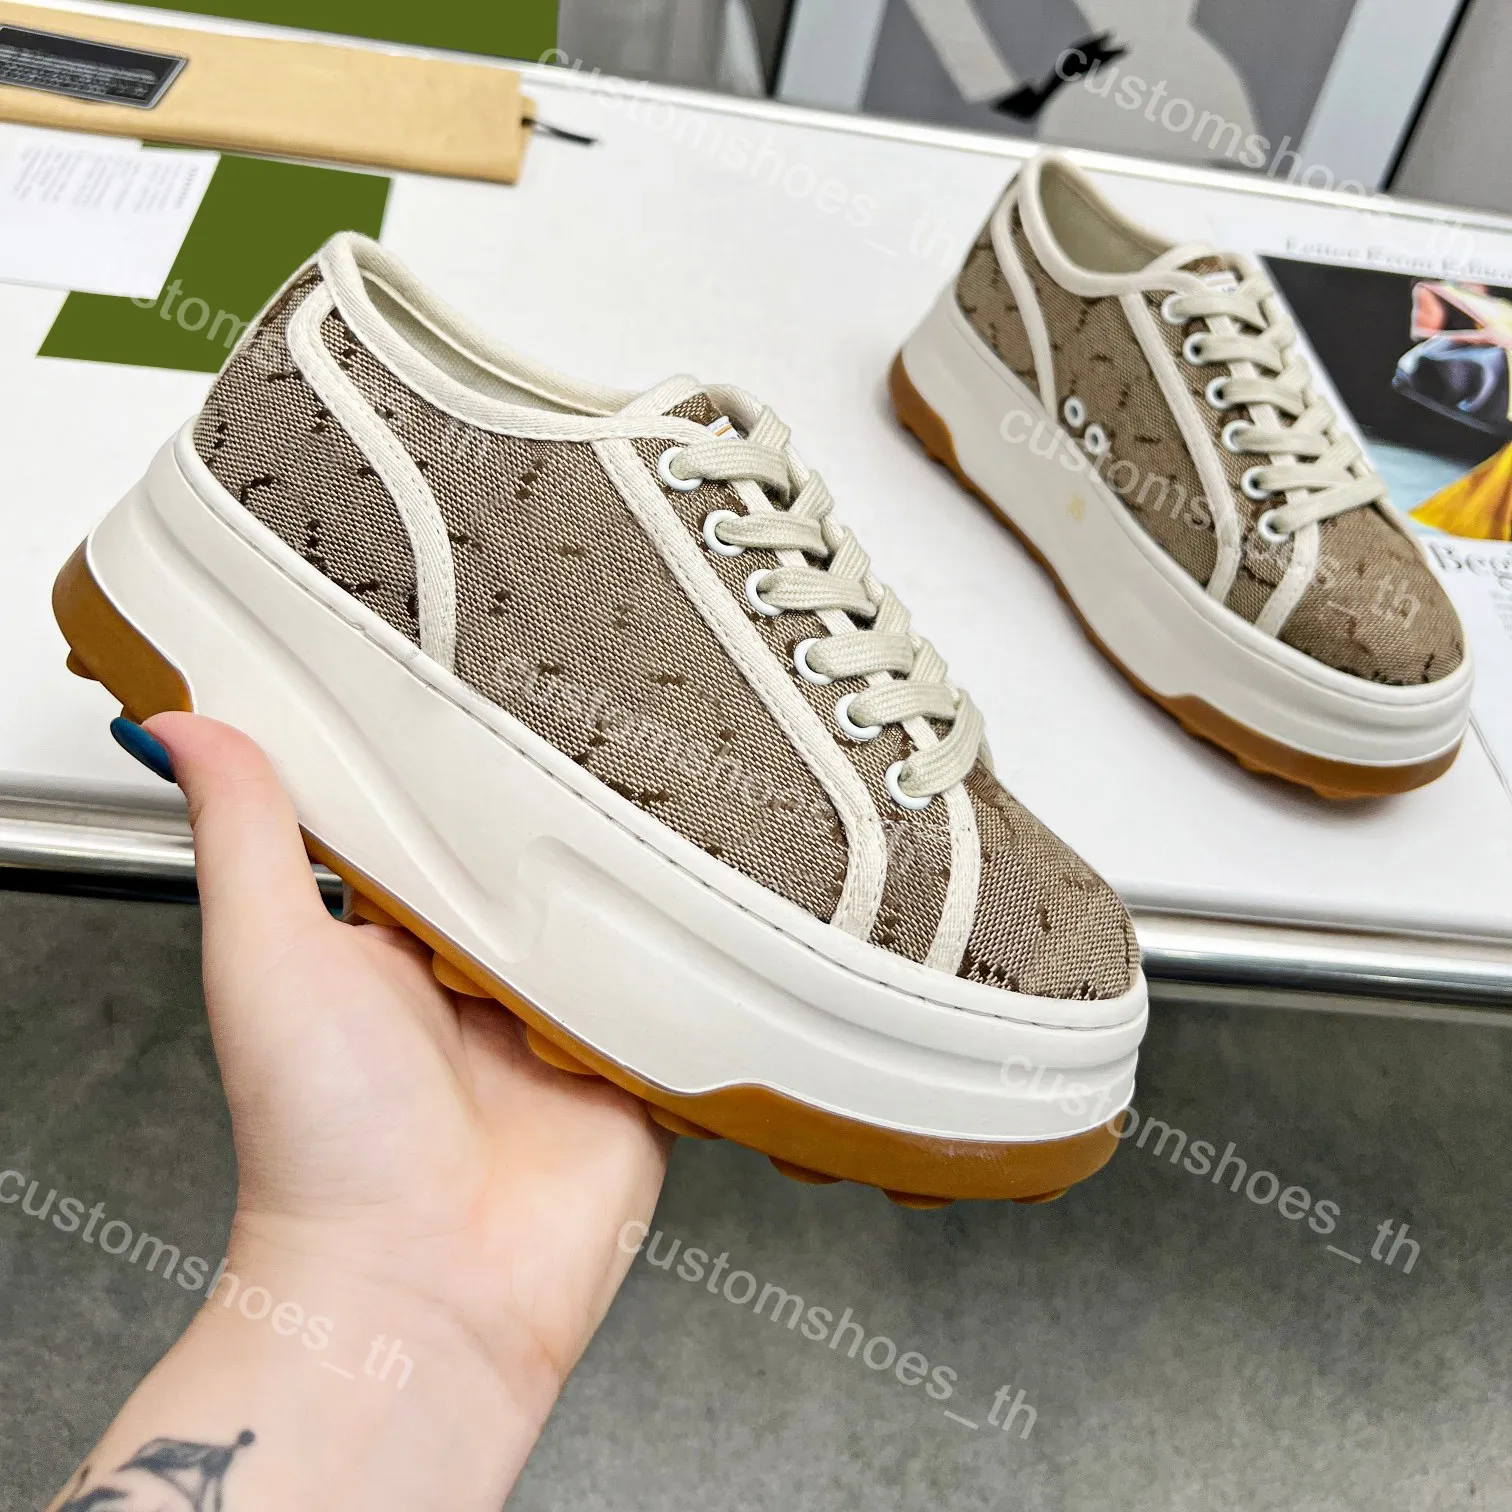 G Sneakers Designer Shoes Women Sneakers G Mbossed Canvas Shoes Low Top кожаная платформа для платформы для печати